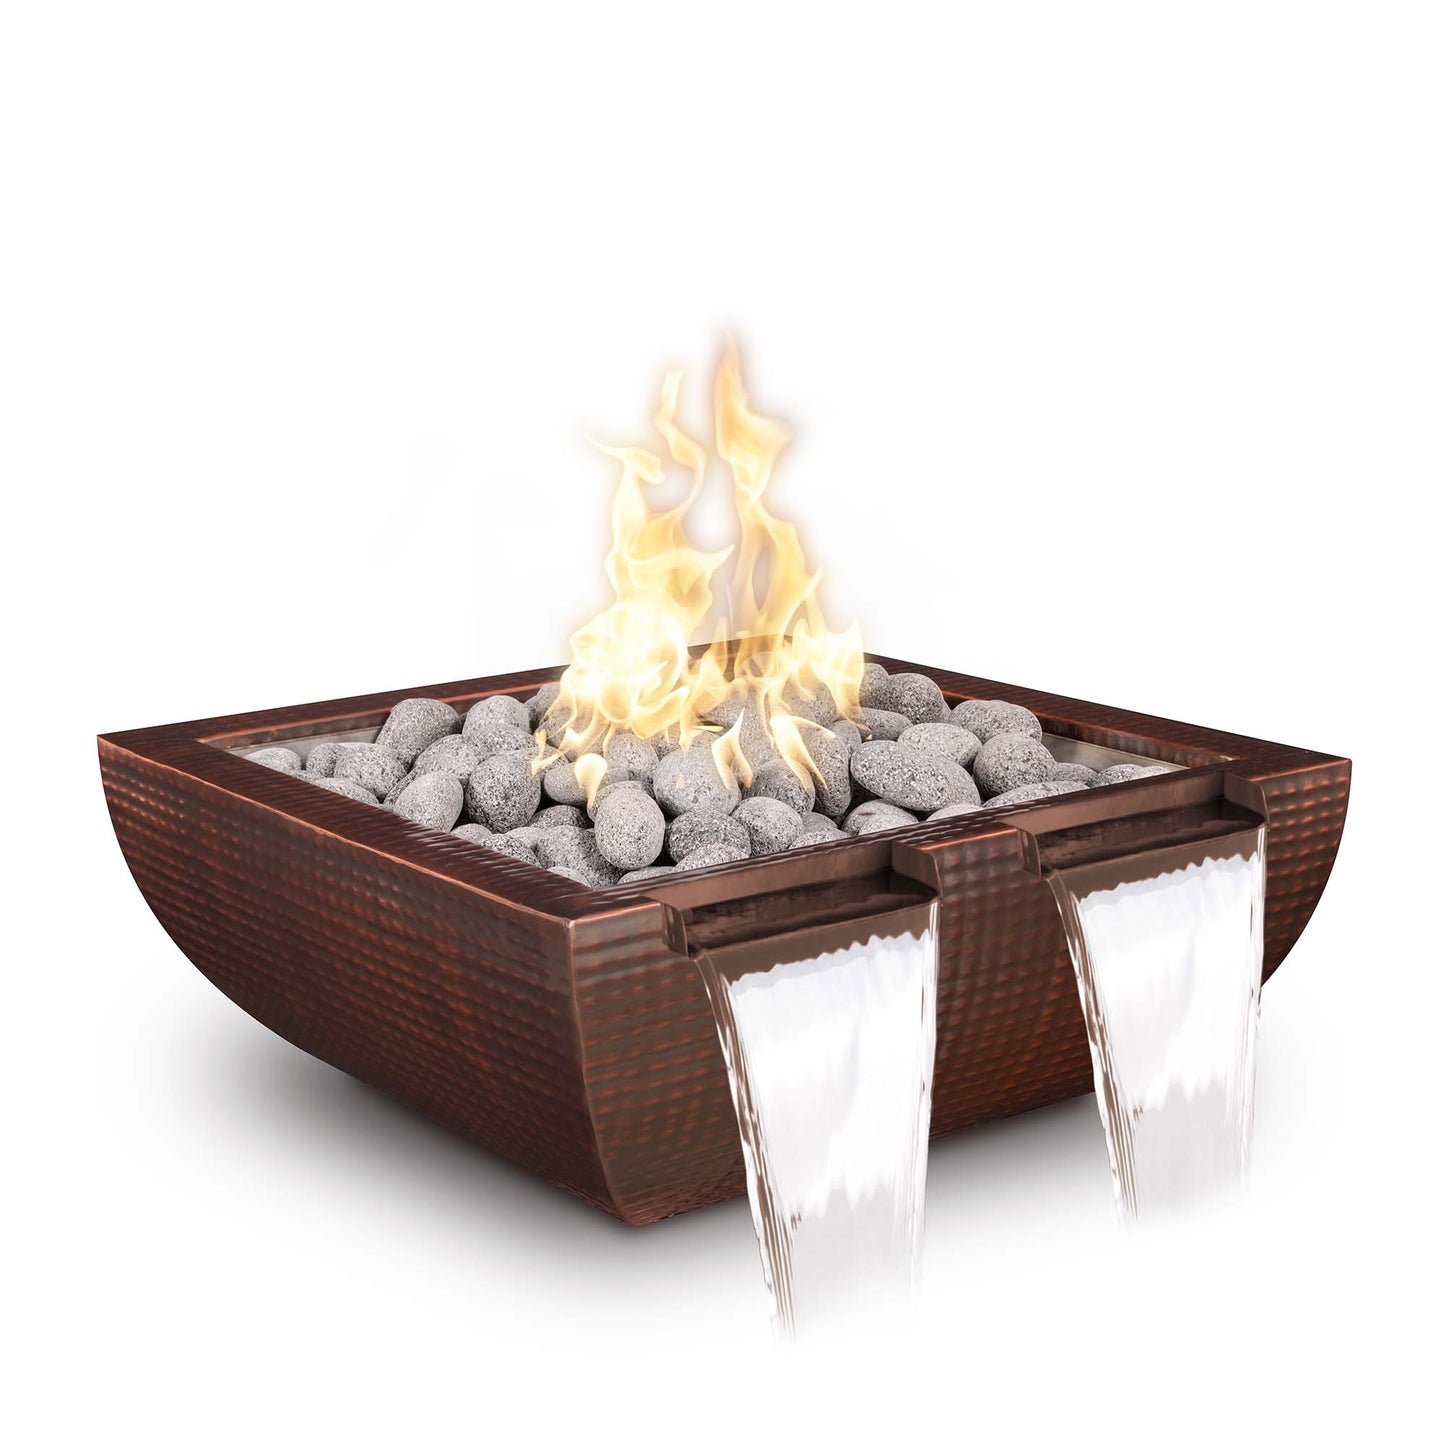 The Outdoor Plus Avalon Twin Spill 36" Java Powder Coated Metal Liquid Propane Fire & Water Bowl with Match Lit with Flame Sense Ignition